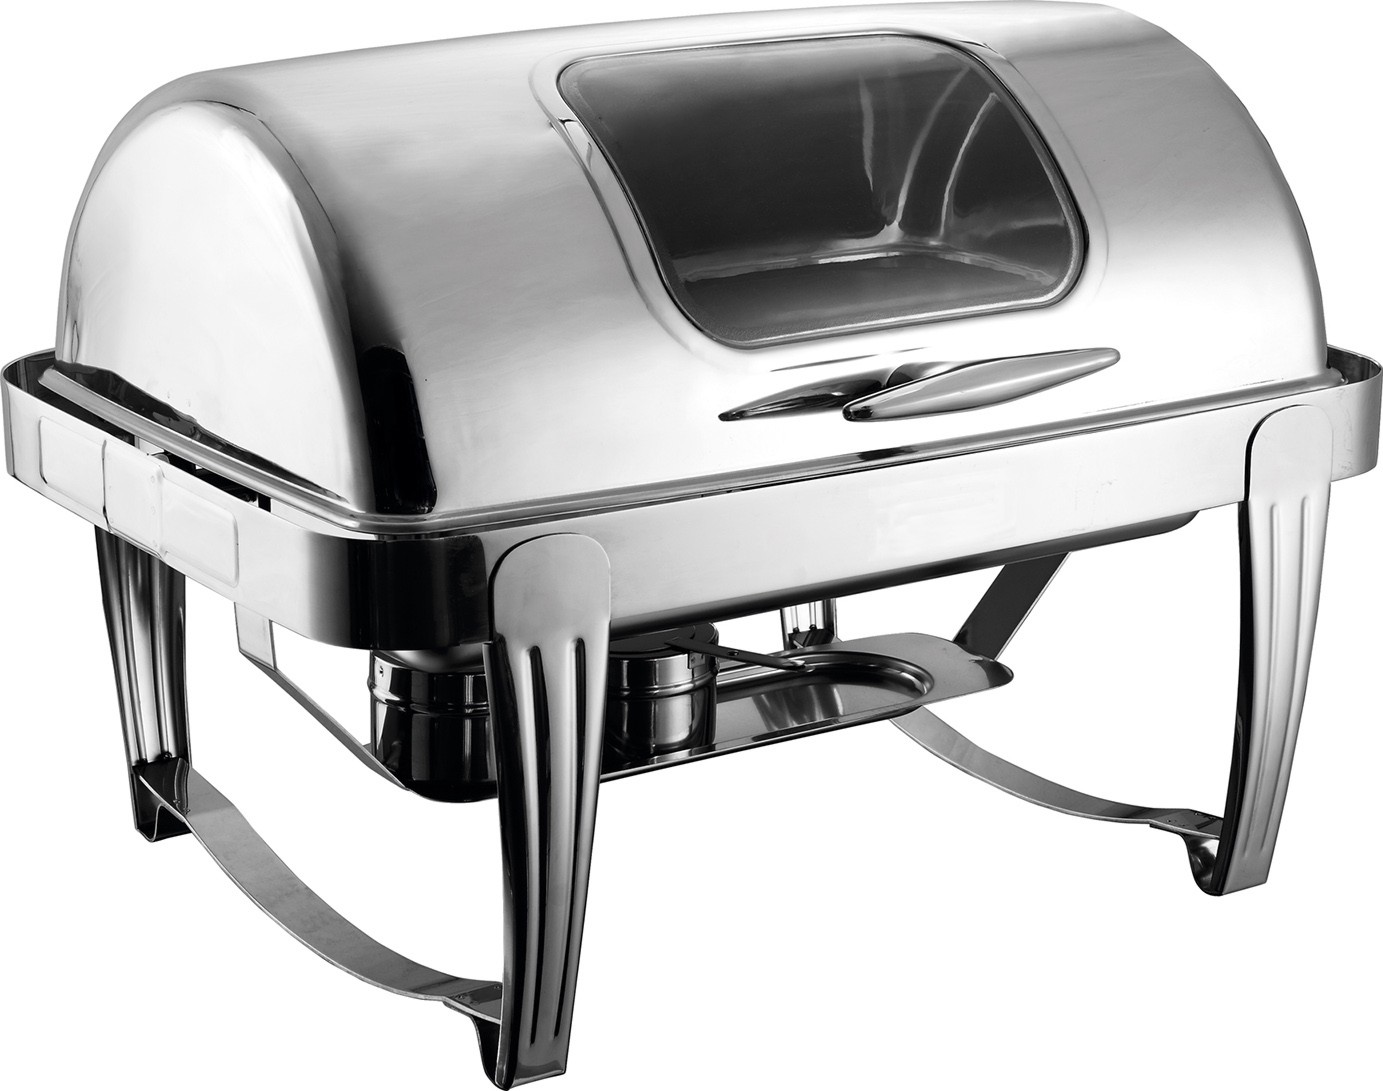 GRT-723BKS Visible Window Cheap Chafing Dish For Sale